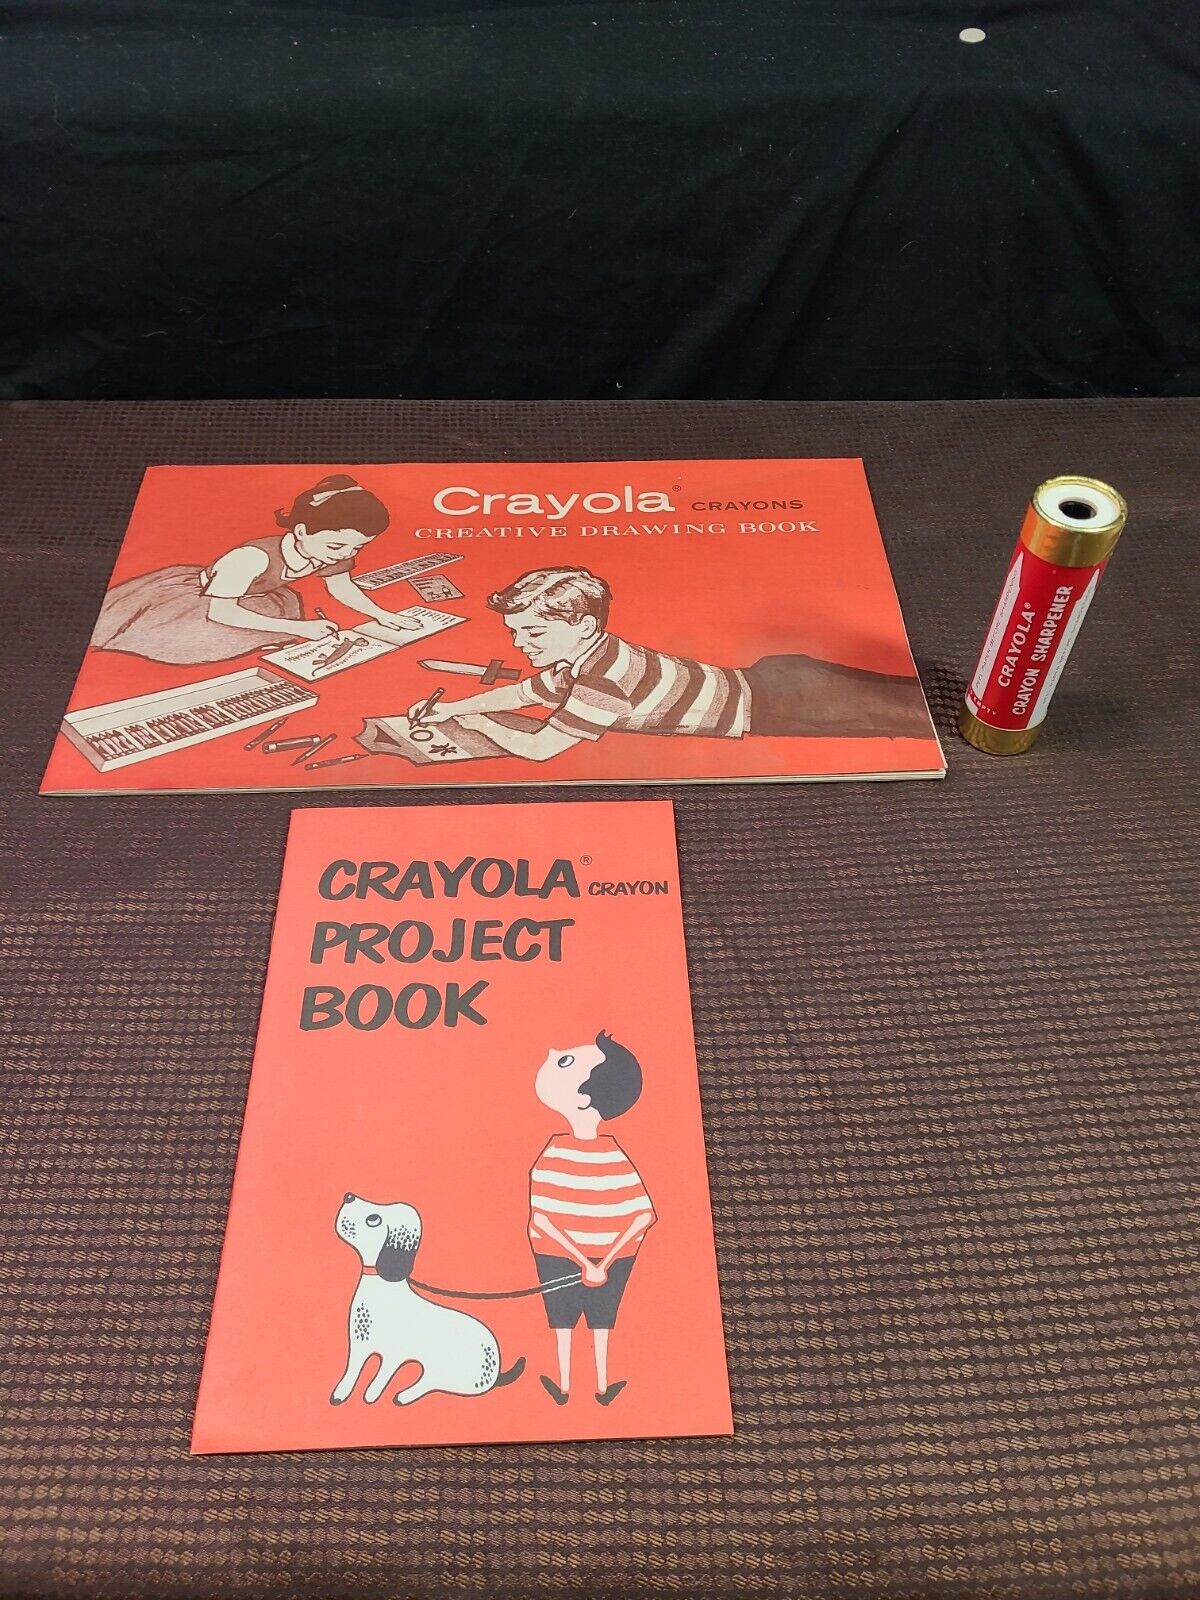 VTG 1958 Crayola Crayons Creative Drawing & Project Books + Sharpener Never Used